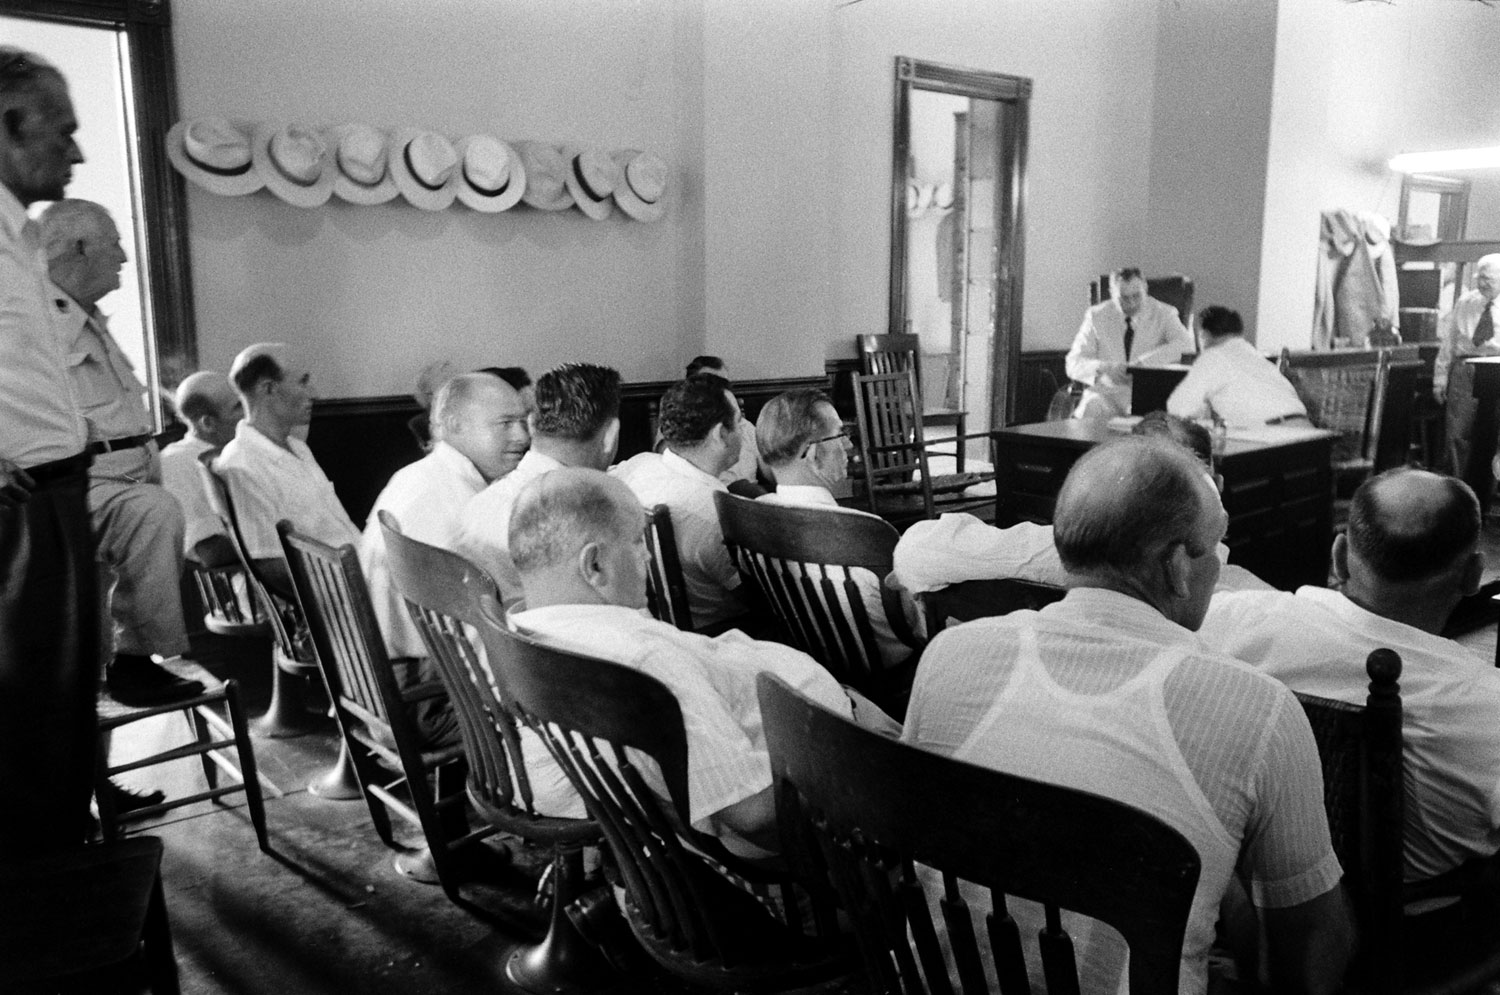 A scene during the trial of Roy Bryant and J.W. Milam for the kidnapping and murder of Emmett Till.